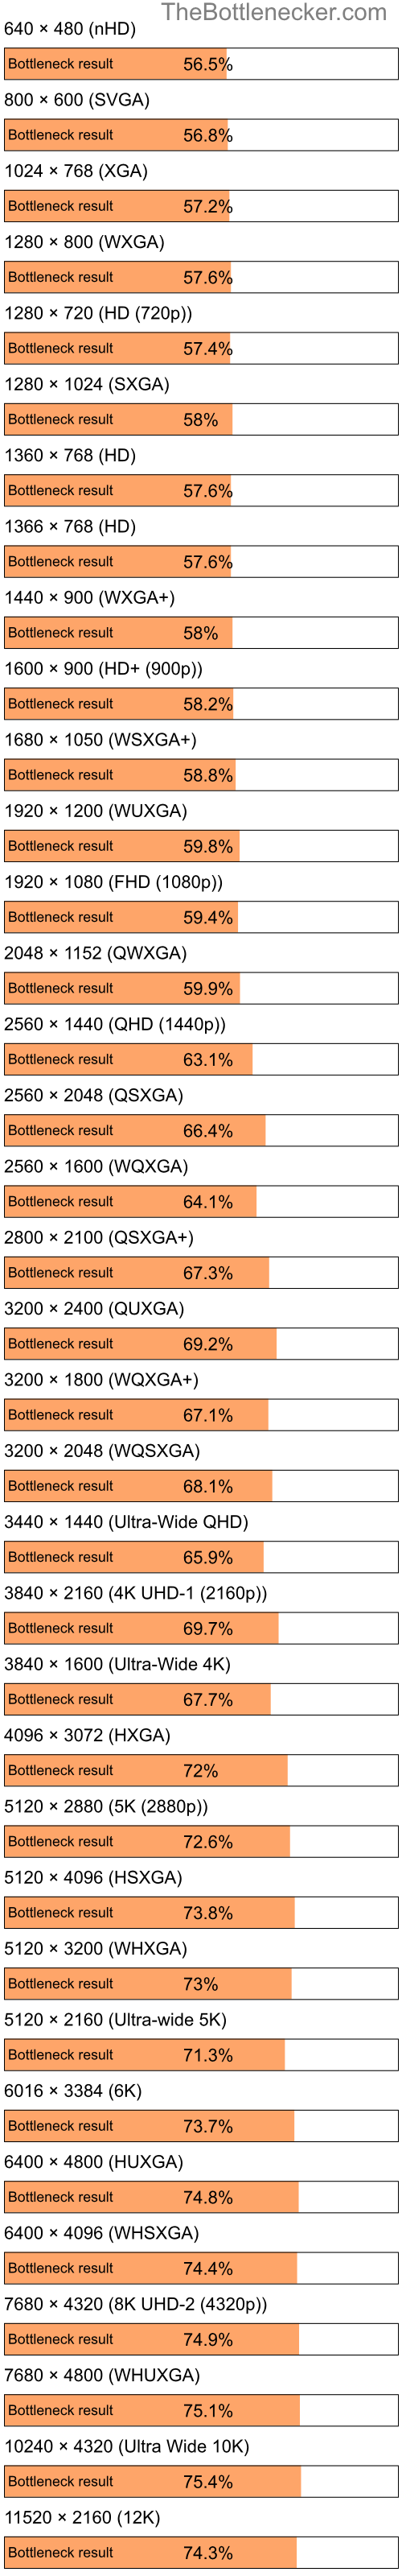 Bottleneck results by resolution for Intel Celeron M 420 and NVIDIA Quadro FX 360M in Processor Intense Tasks